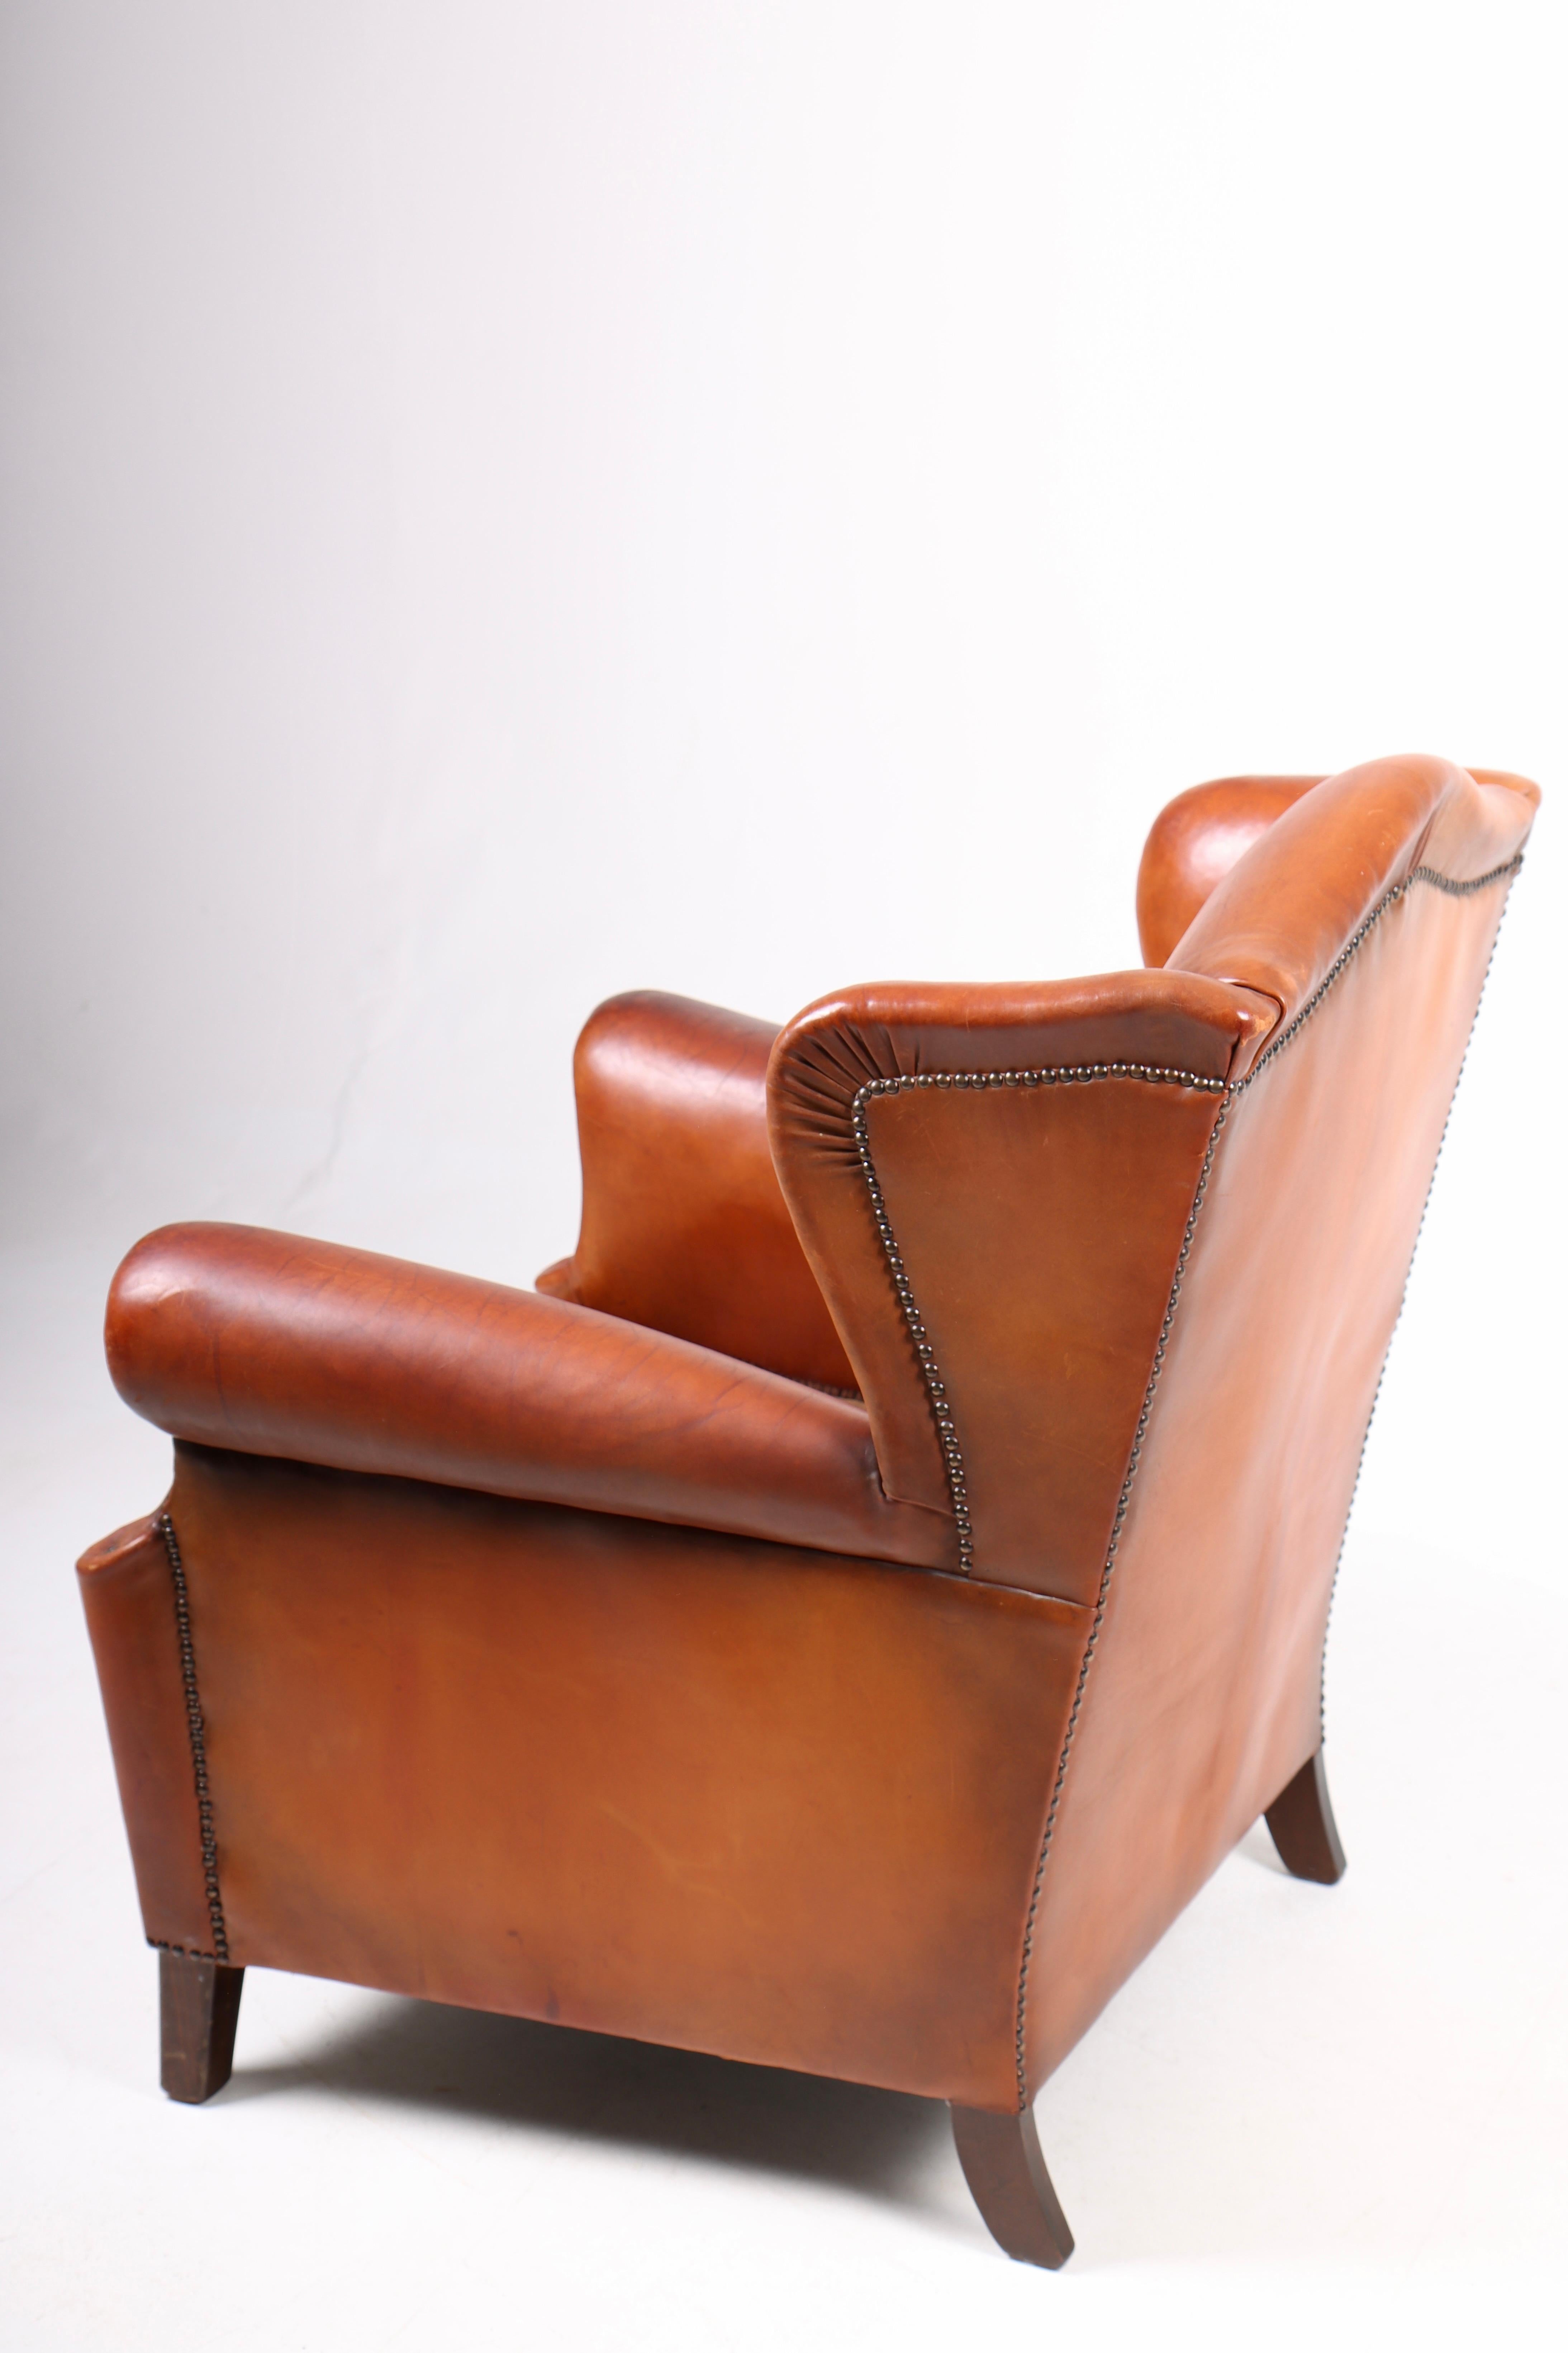 Wingback Chair in Cognac Leather, Denmark, 1940s In Good Condition For Sale In Lejre, DK